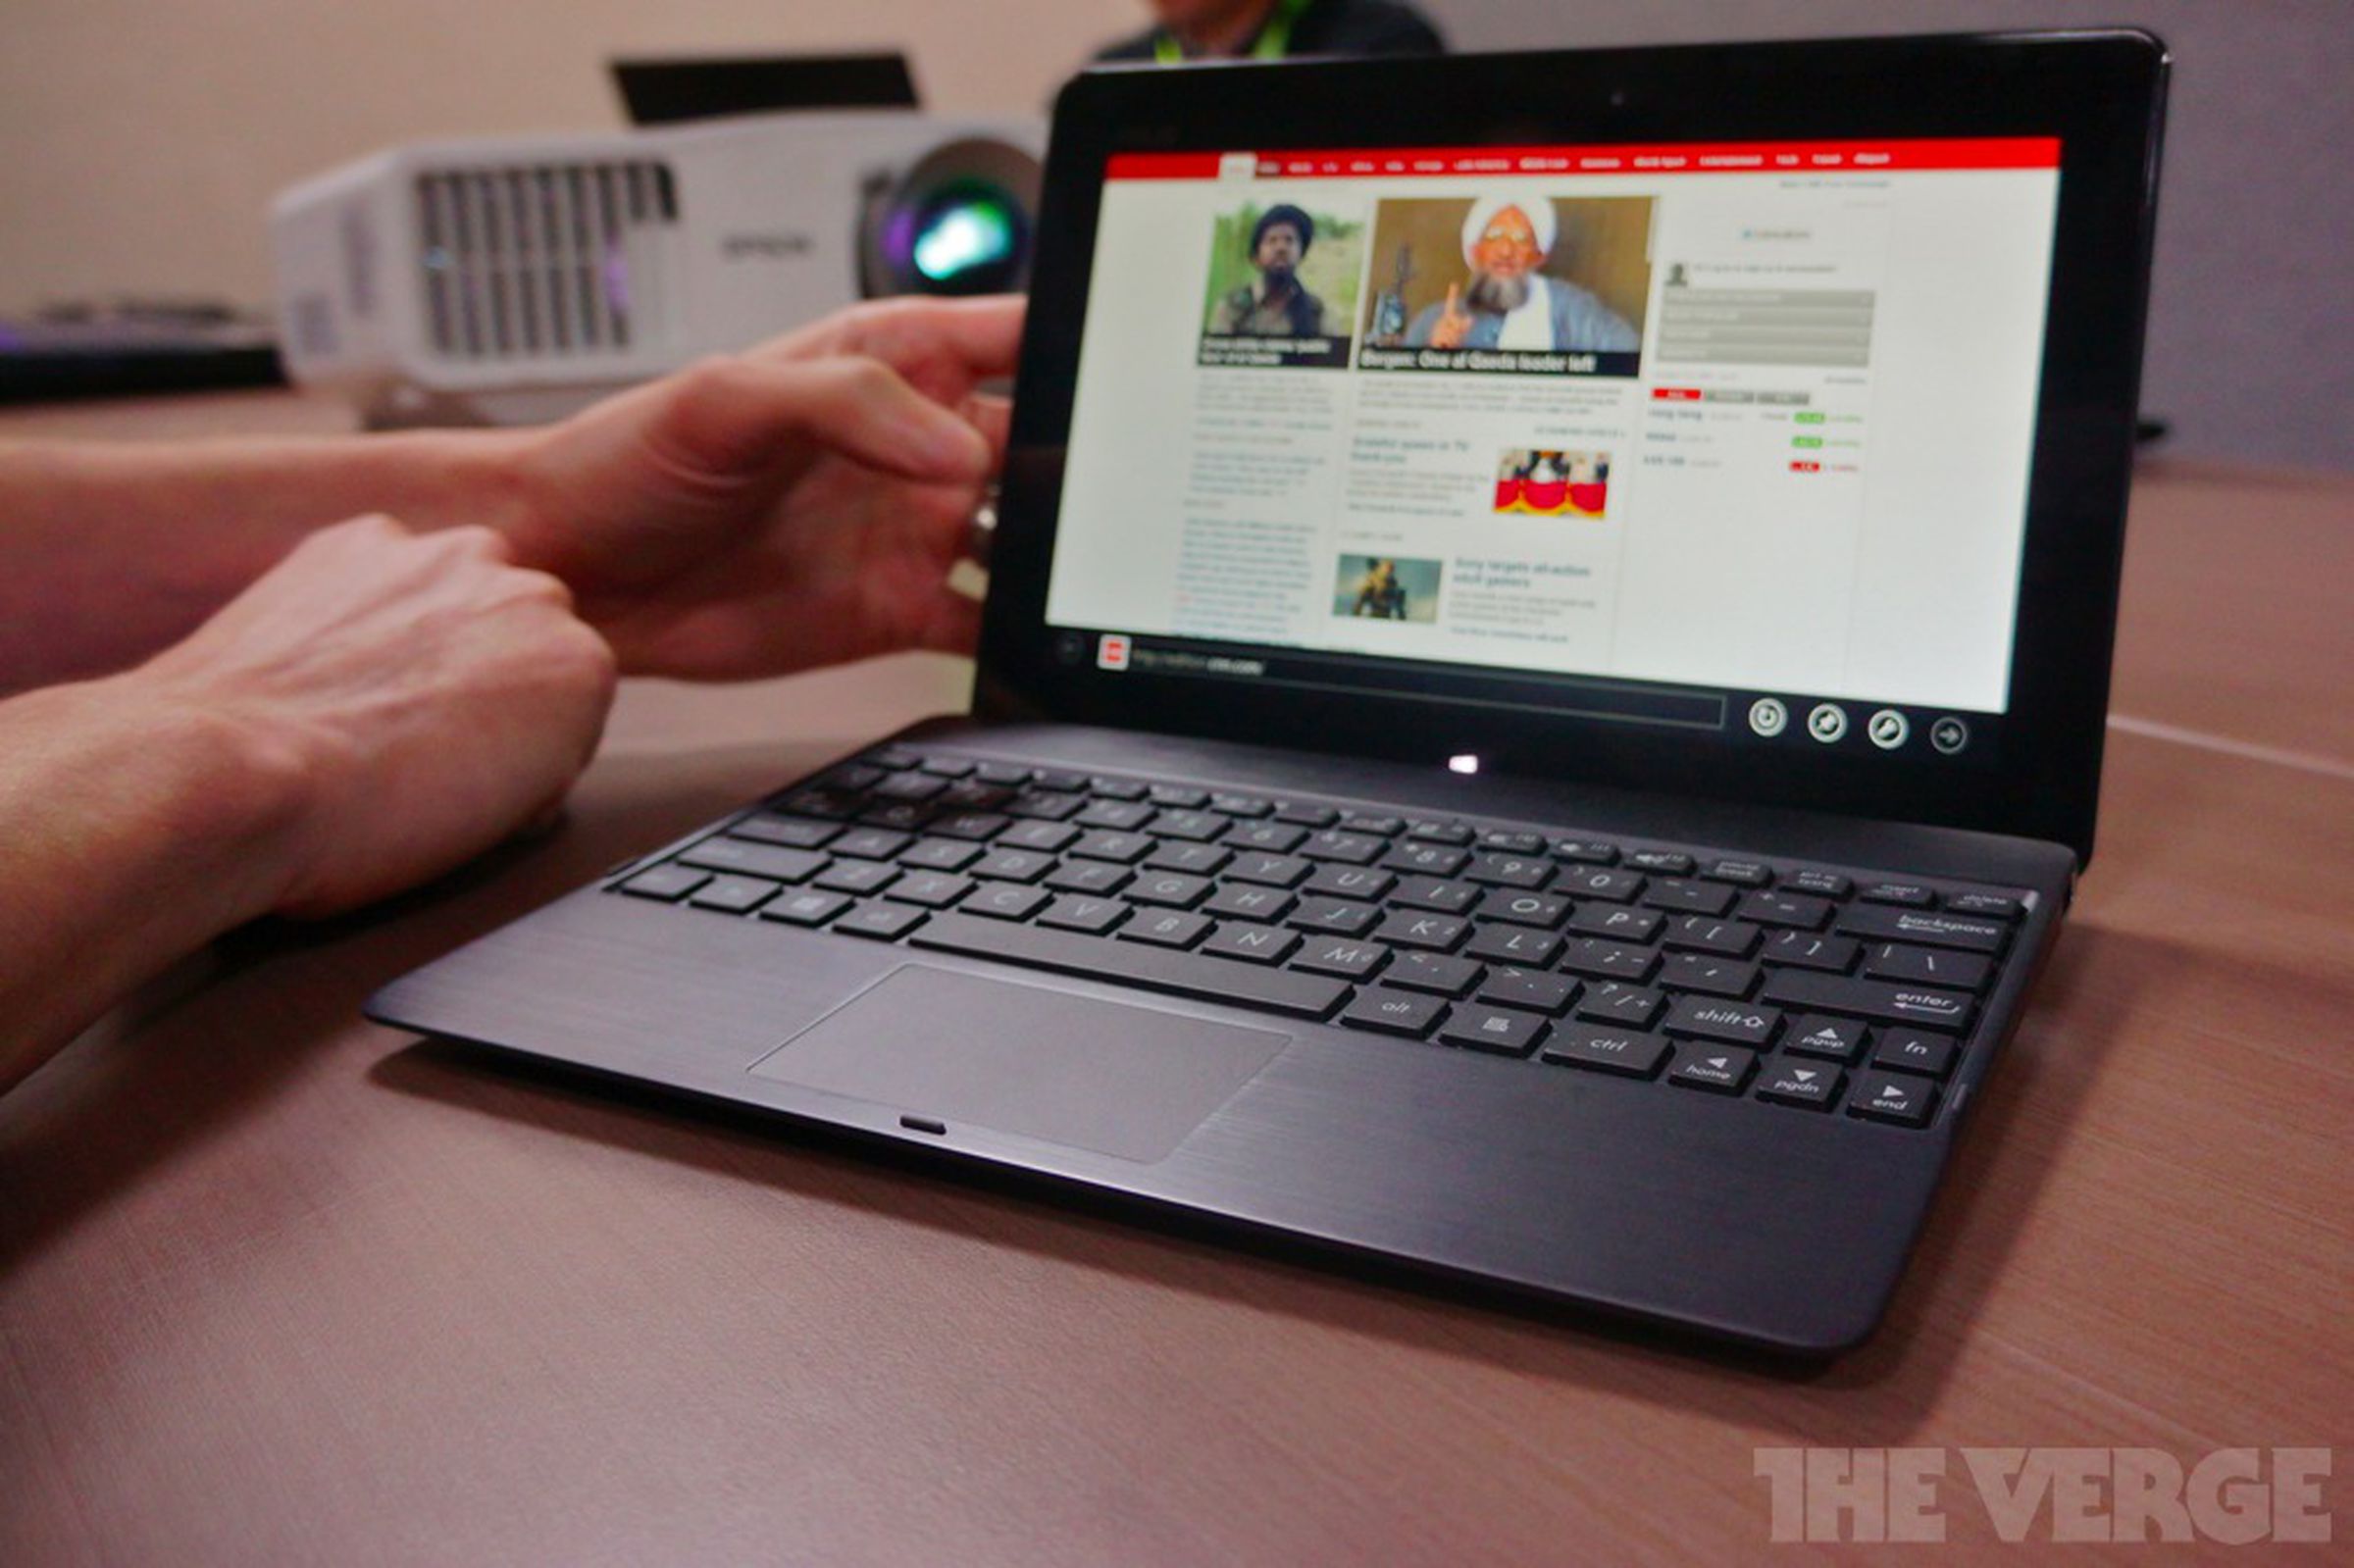 Asus Tablet 600 hands-on photos